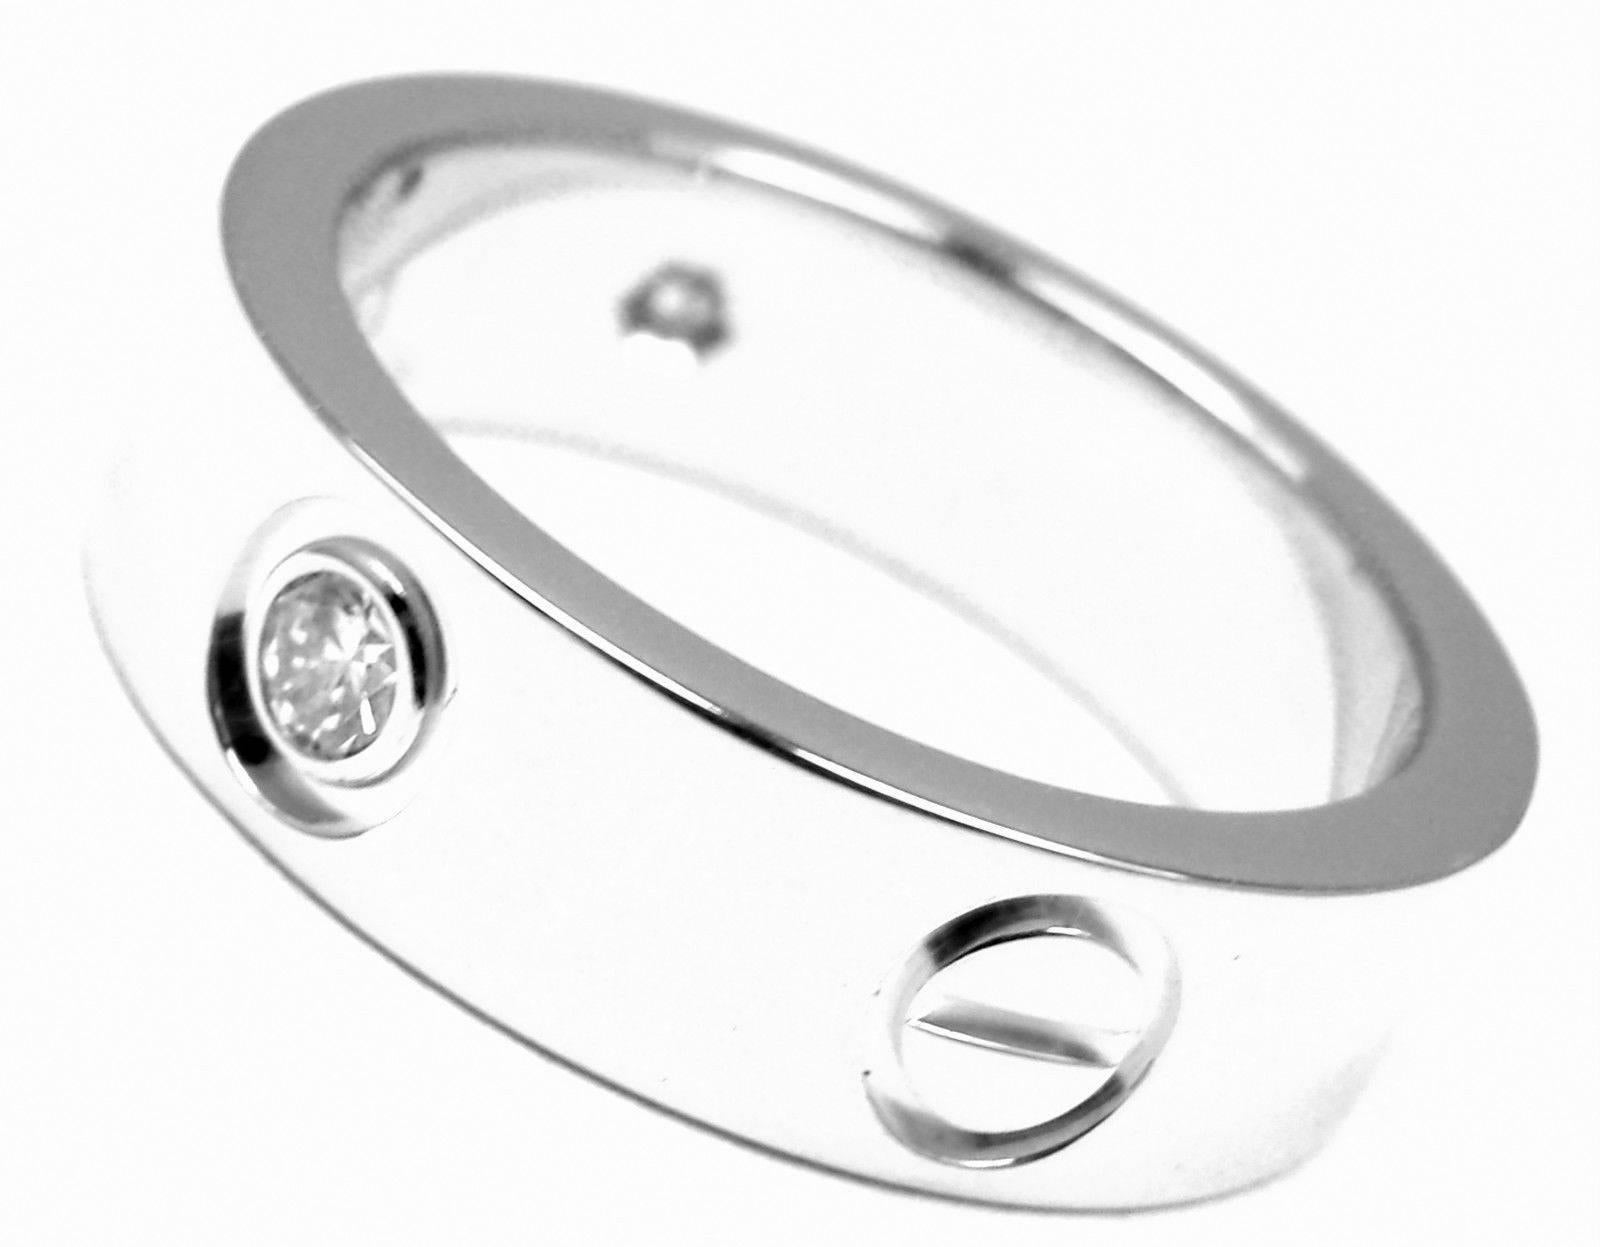 18k White Gold Diamond LOVE Band Ring by Cartier.  
With 3 round brilliant cut diamonds VS1 clarity, E color total weight .22ct
Retail: $3,750
This ring comes with Cartier box.
Details: 
Band Width: 6mm 
Weight:  8.6 grams
Ring Size: European 51, US